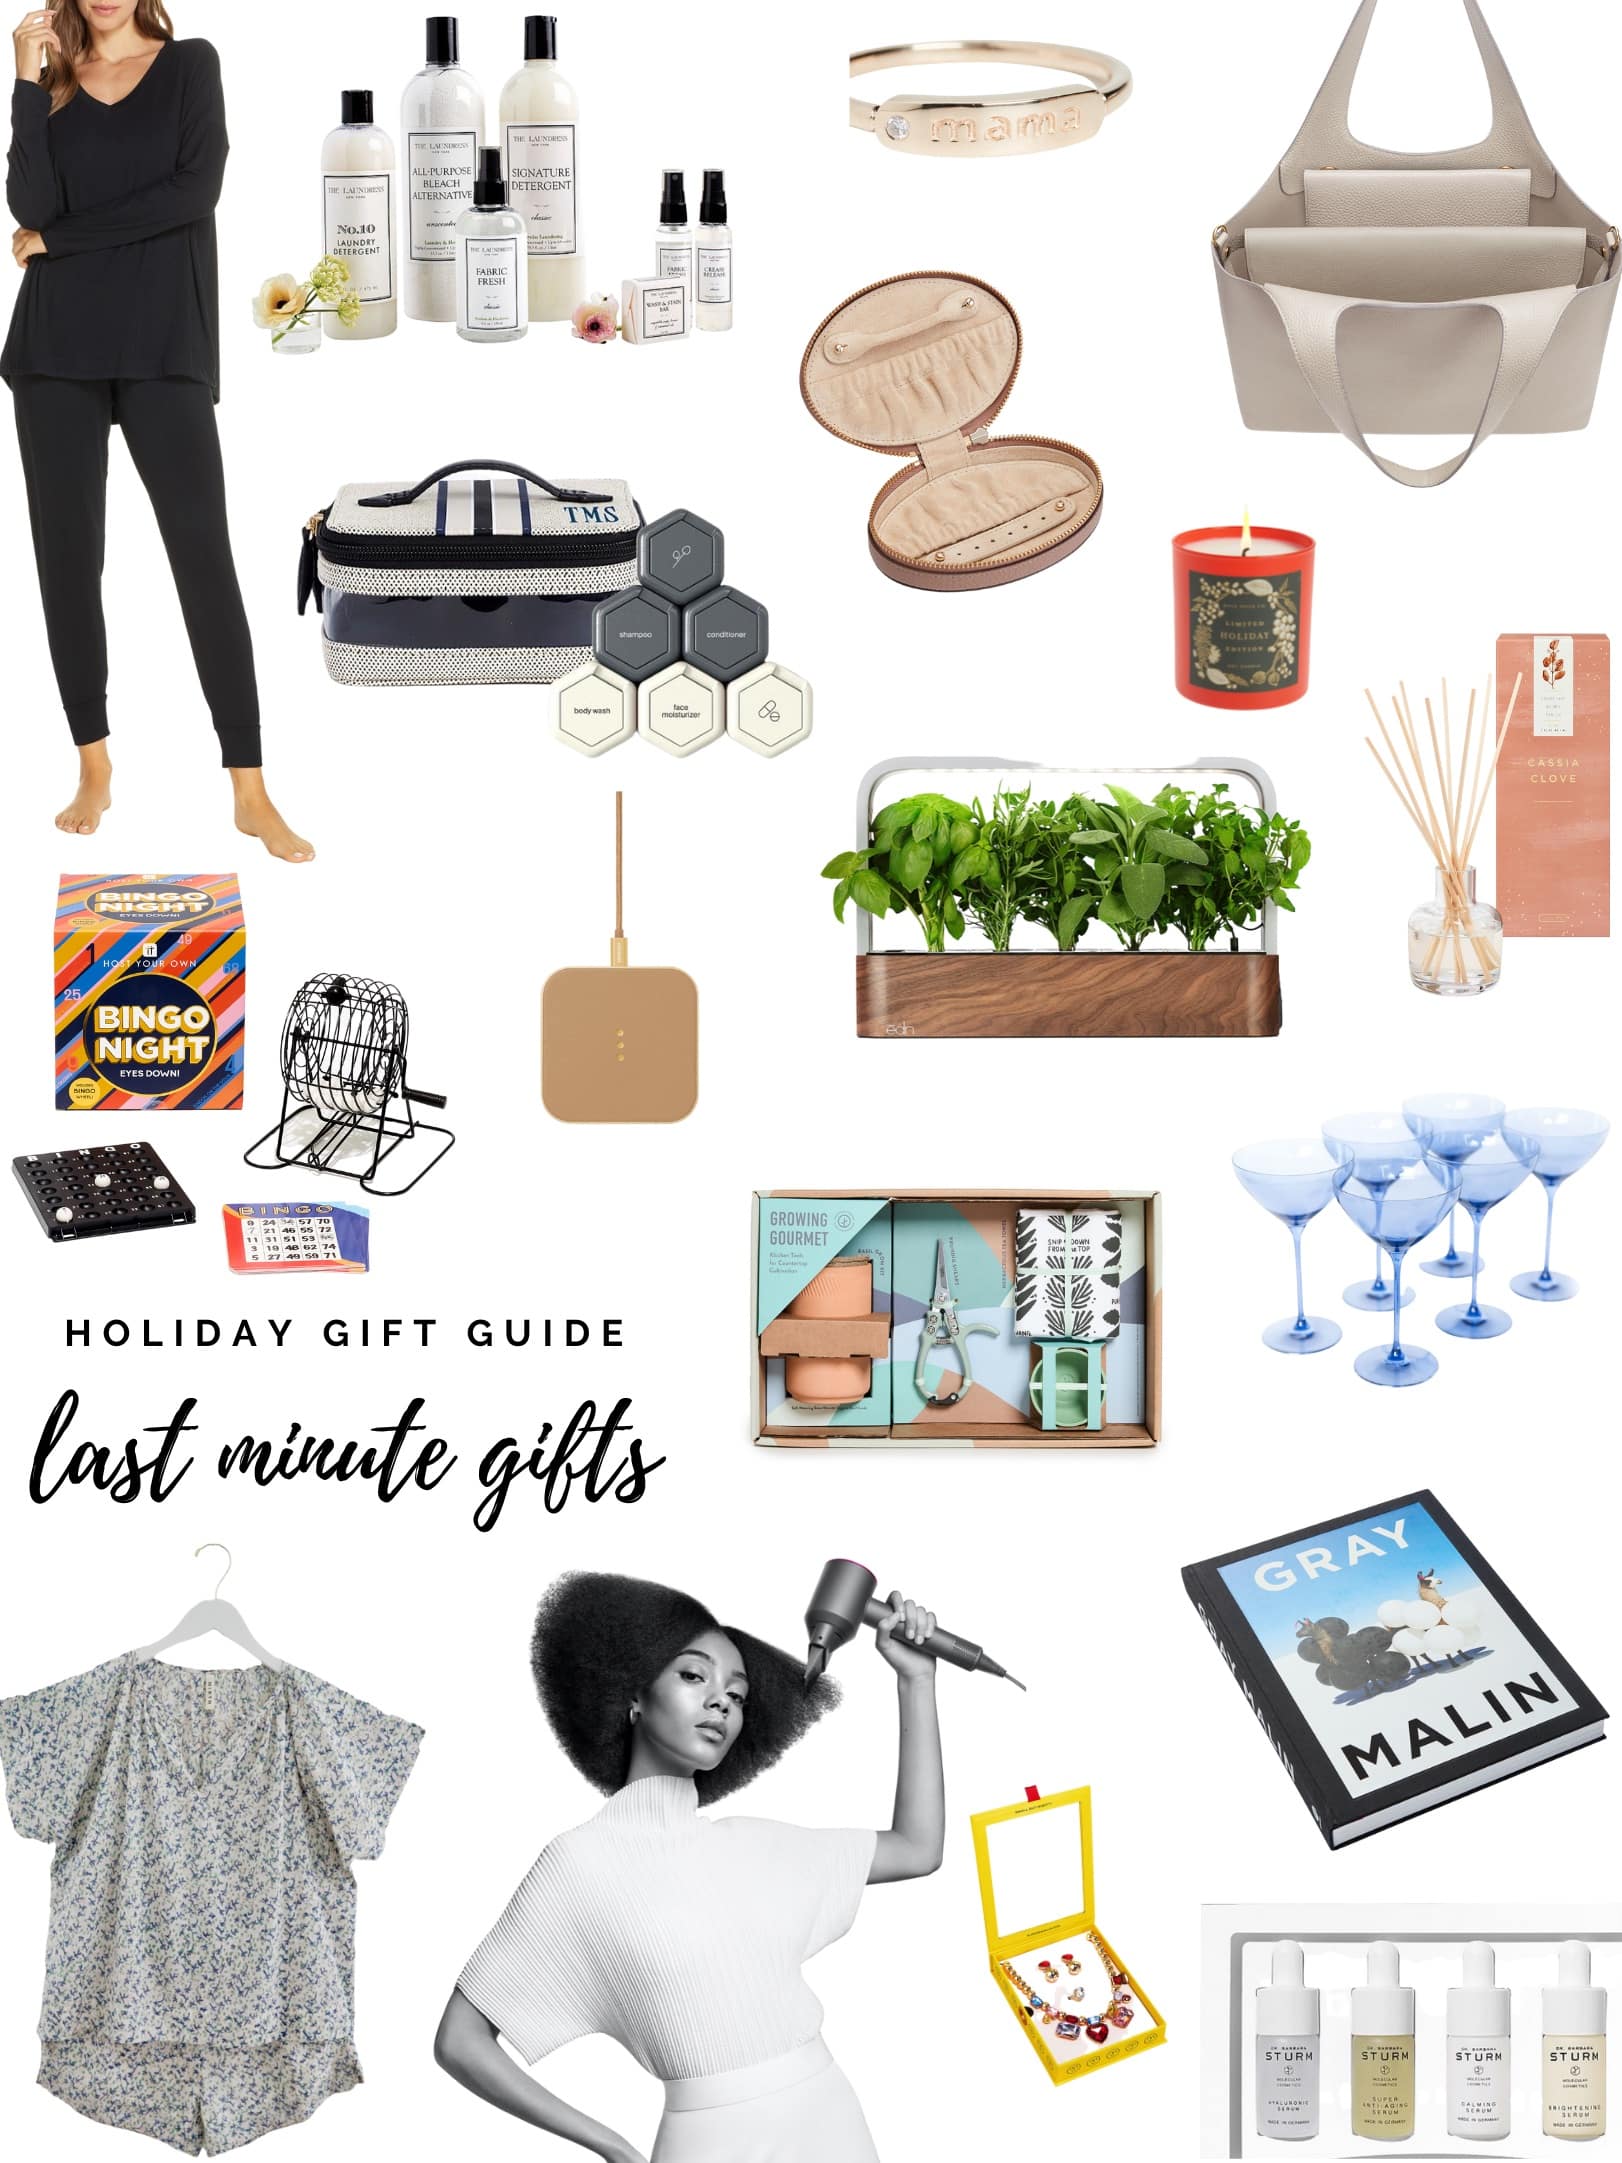 20 Personalized Christmas Gift Ideas for Her | Vprintes